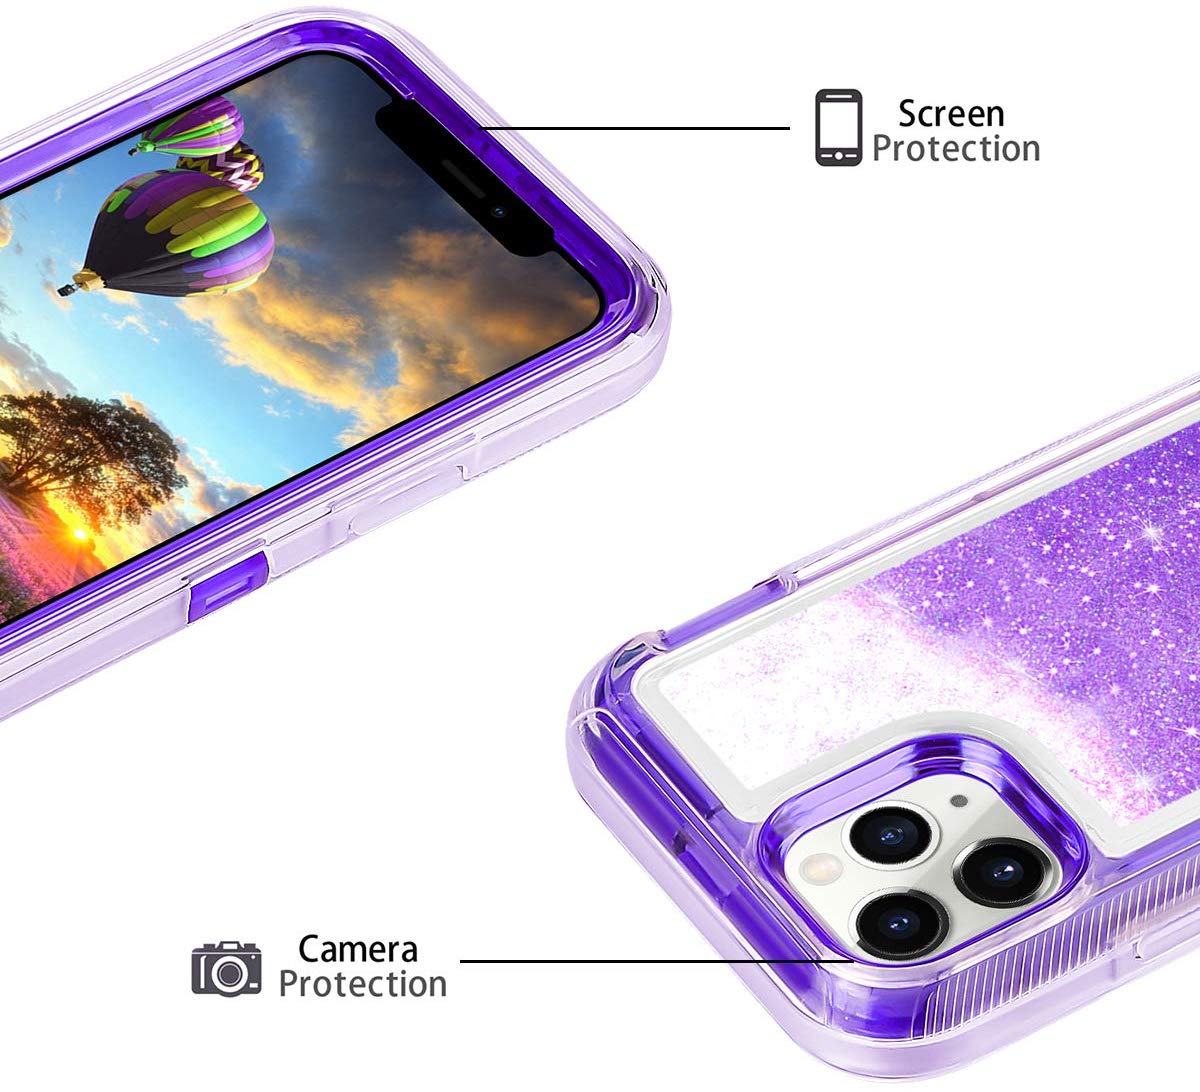 iphone 11 cases and protection